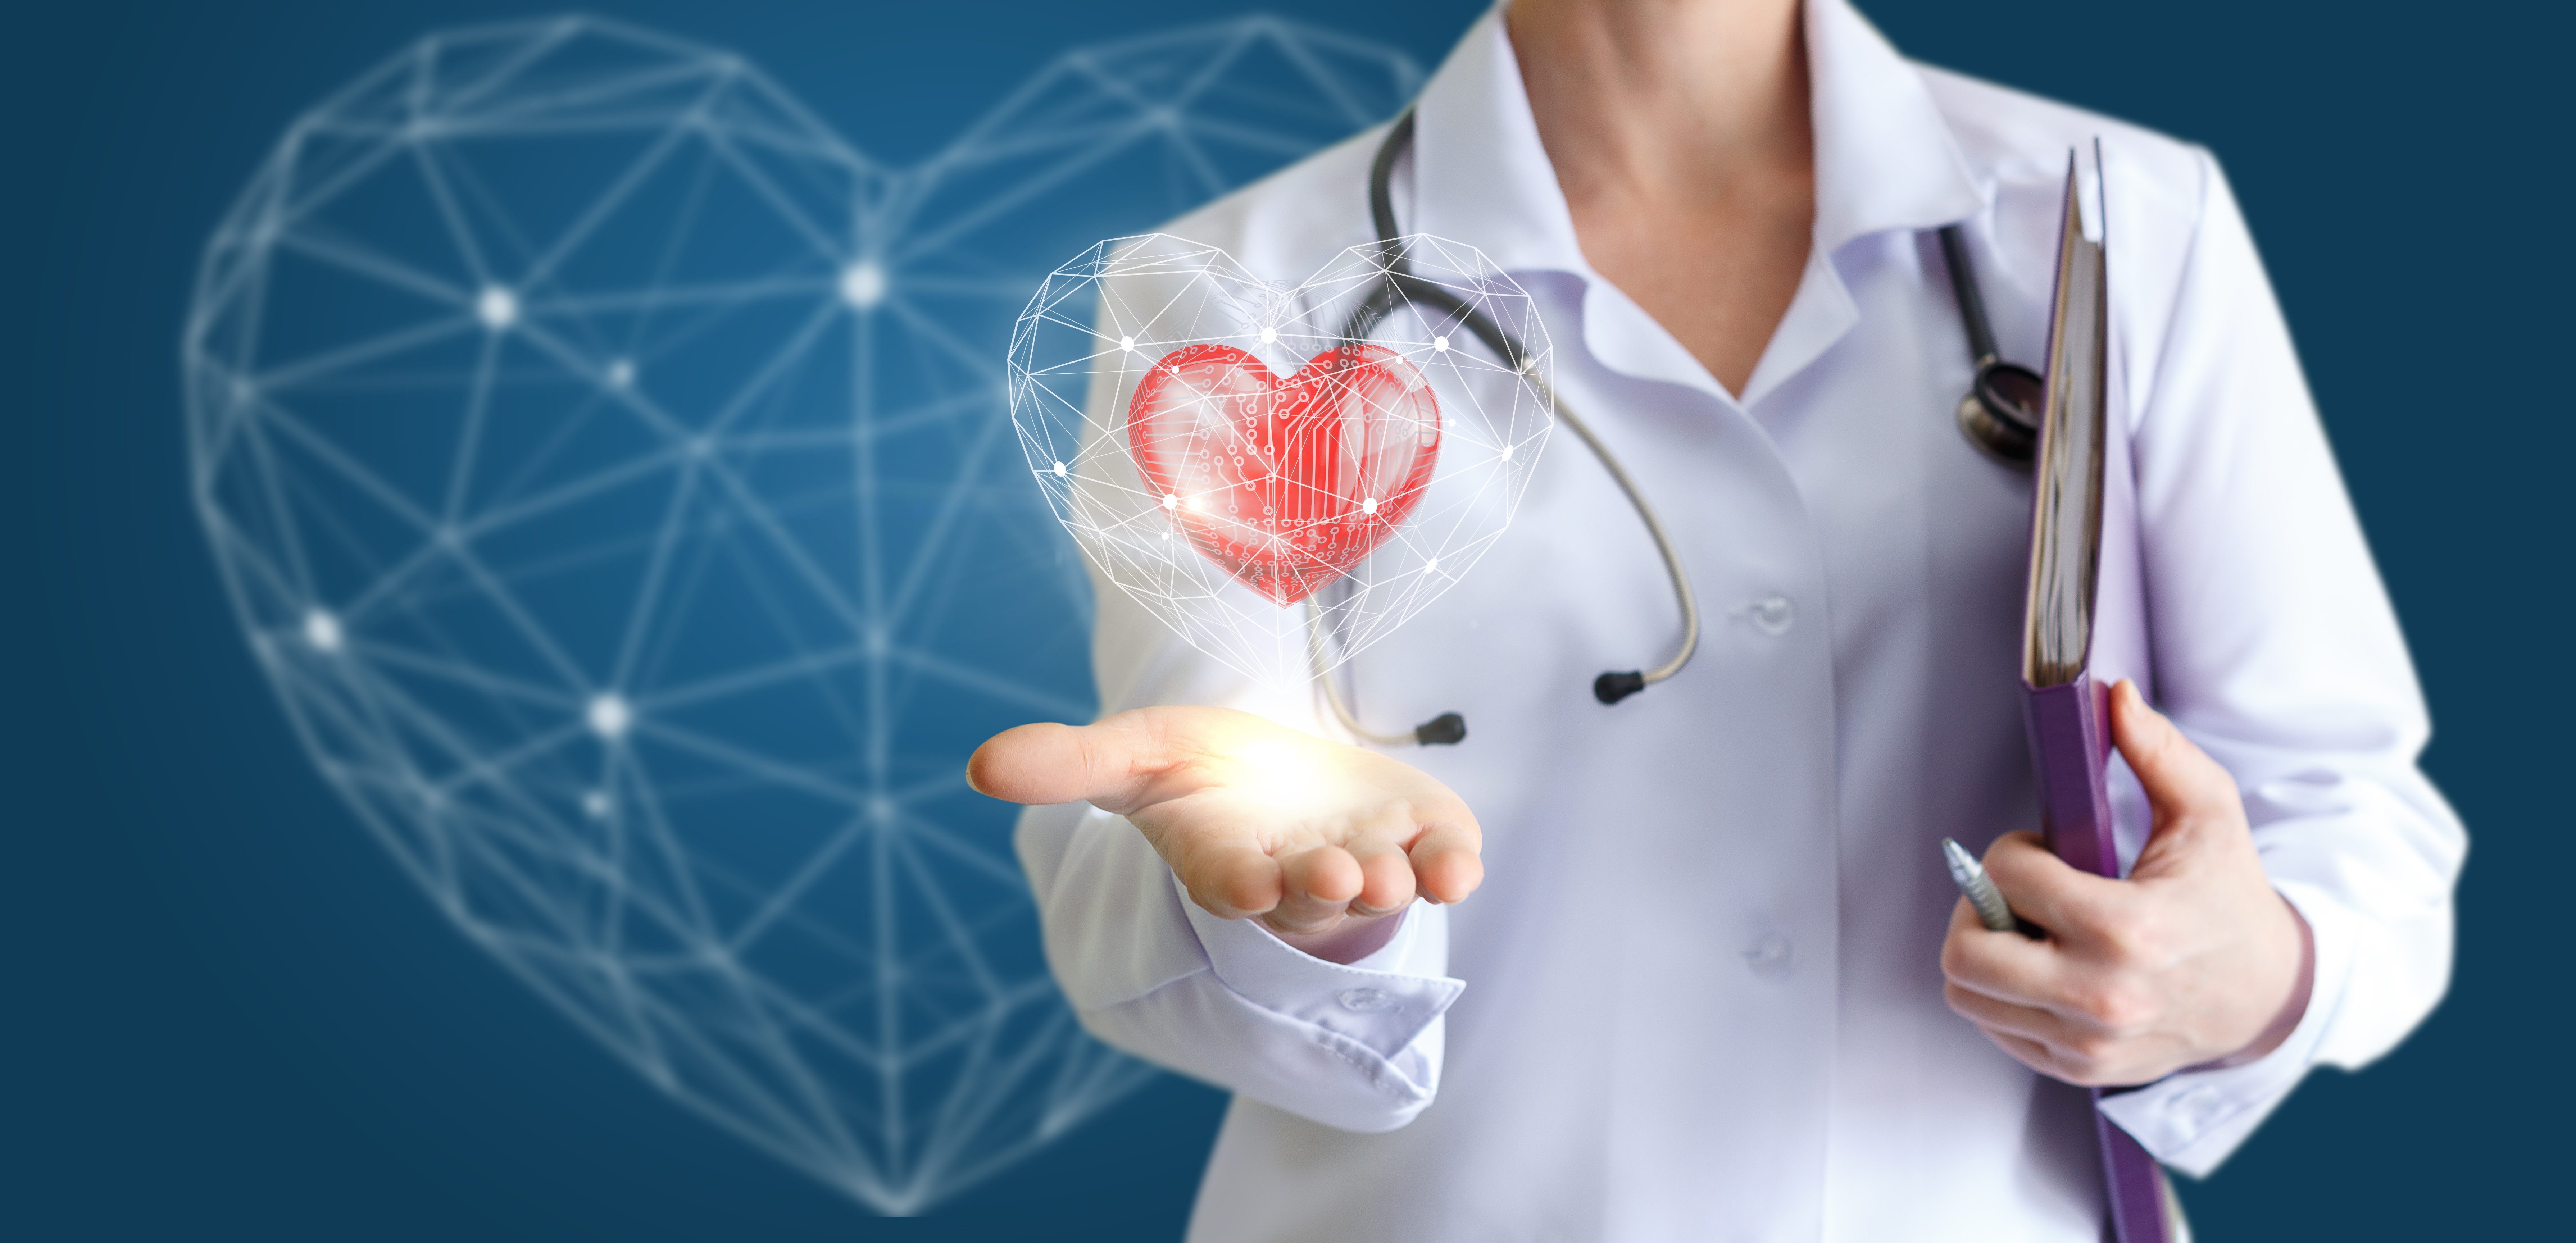 CMS Delays Cardiac Bundles, But Now is The Time To Plan